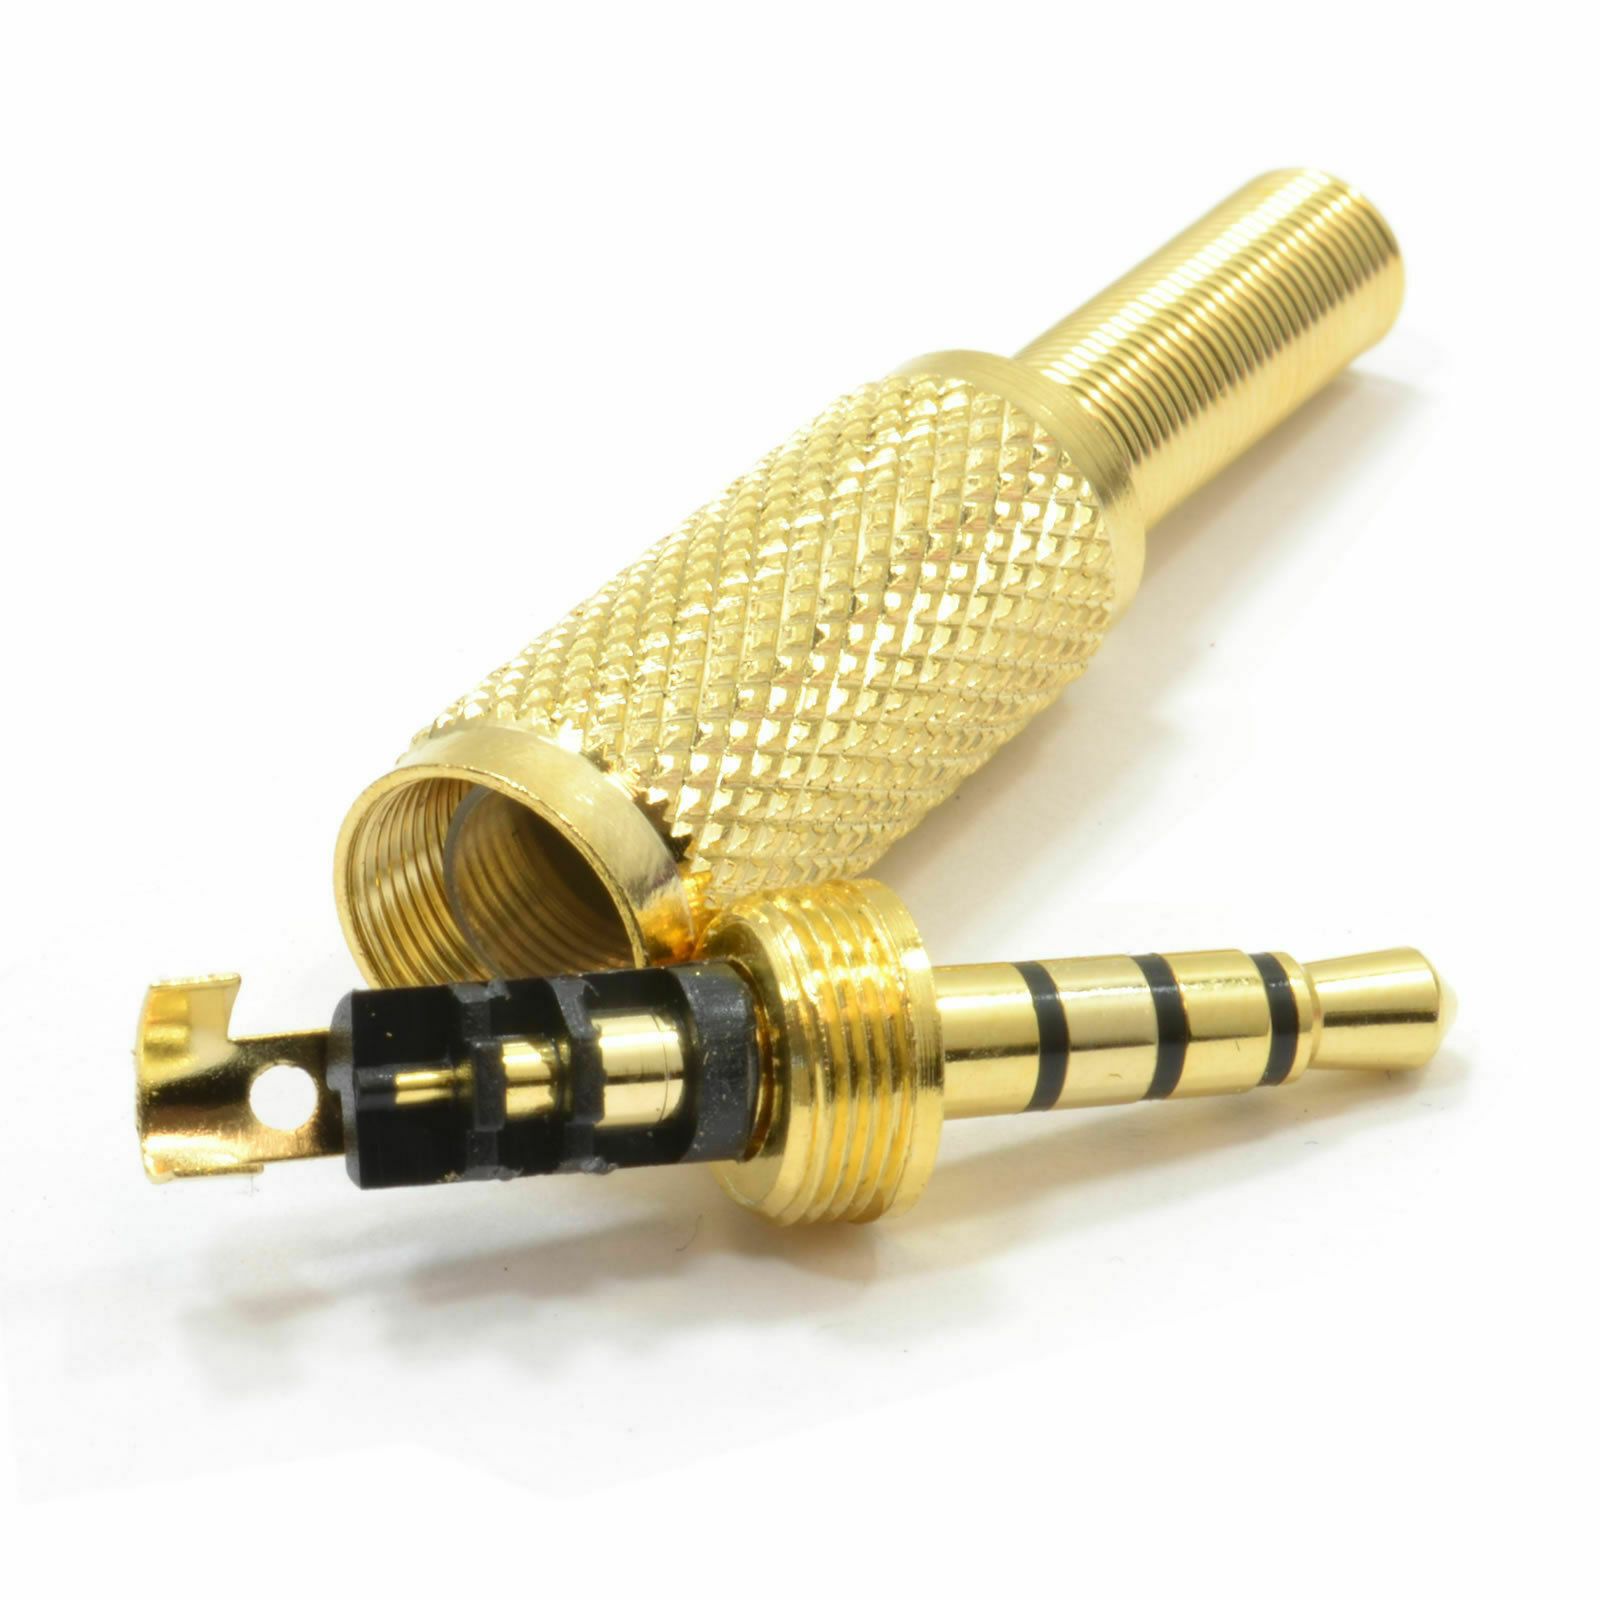 35mm-18-inch-Stereo-Male-Audio-TRS-Jack-Plug-Adapter-Connector-Practical-Gold-253971842003-3.jpg